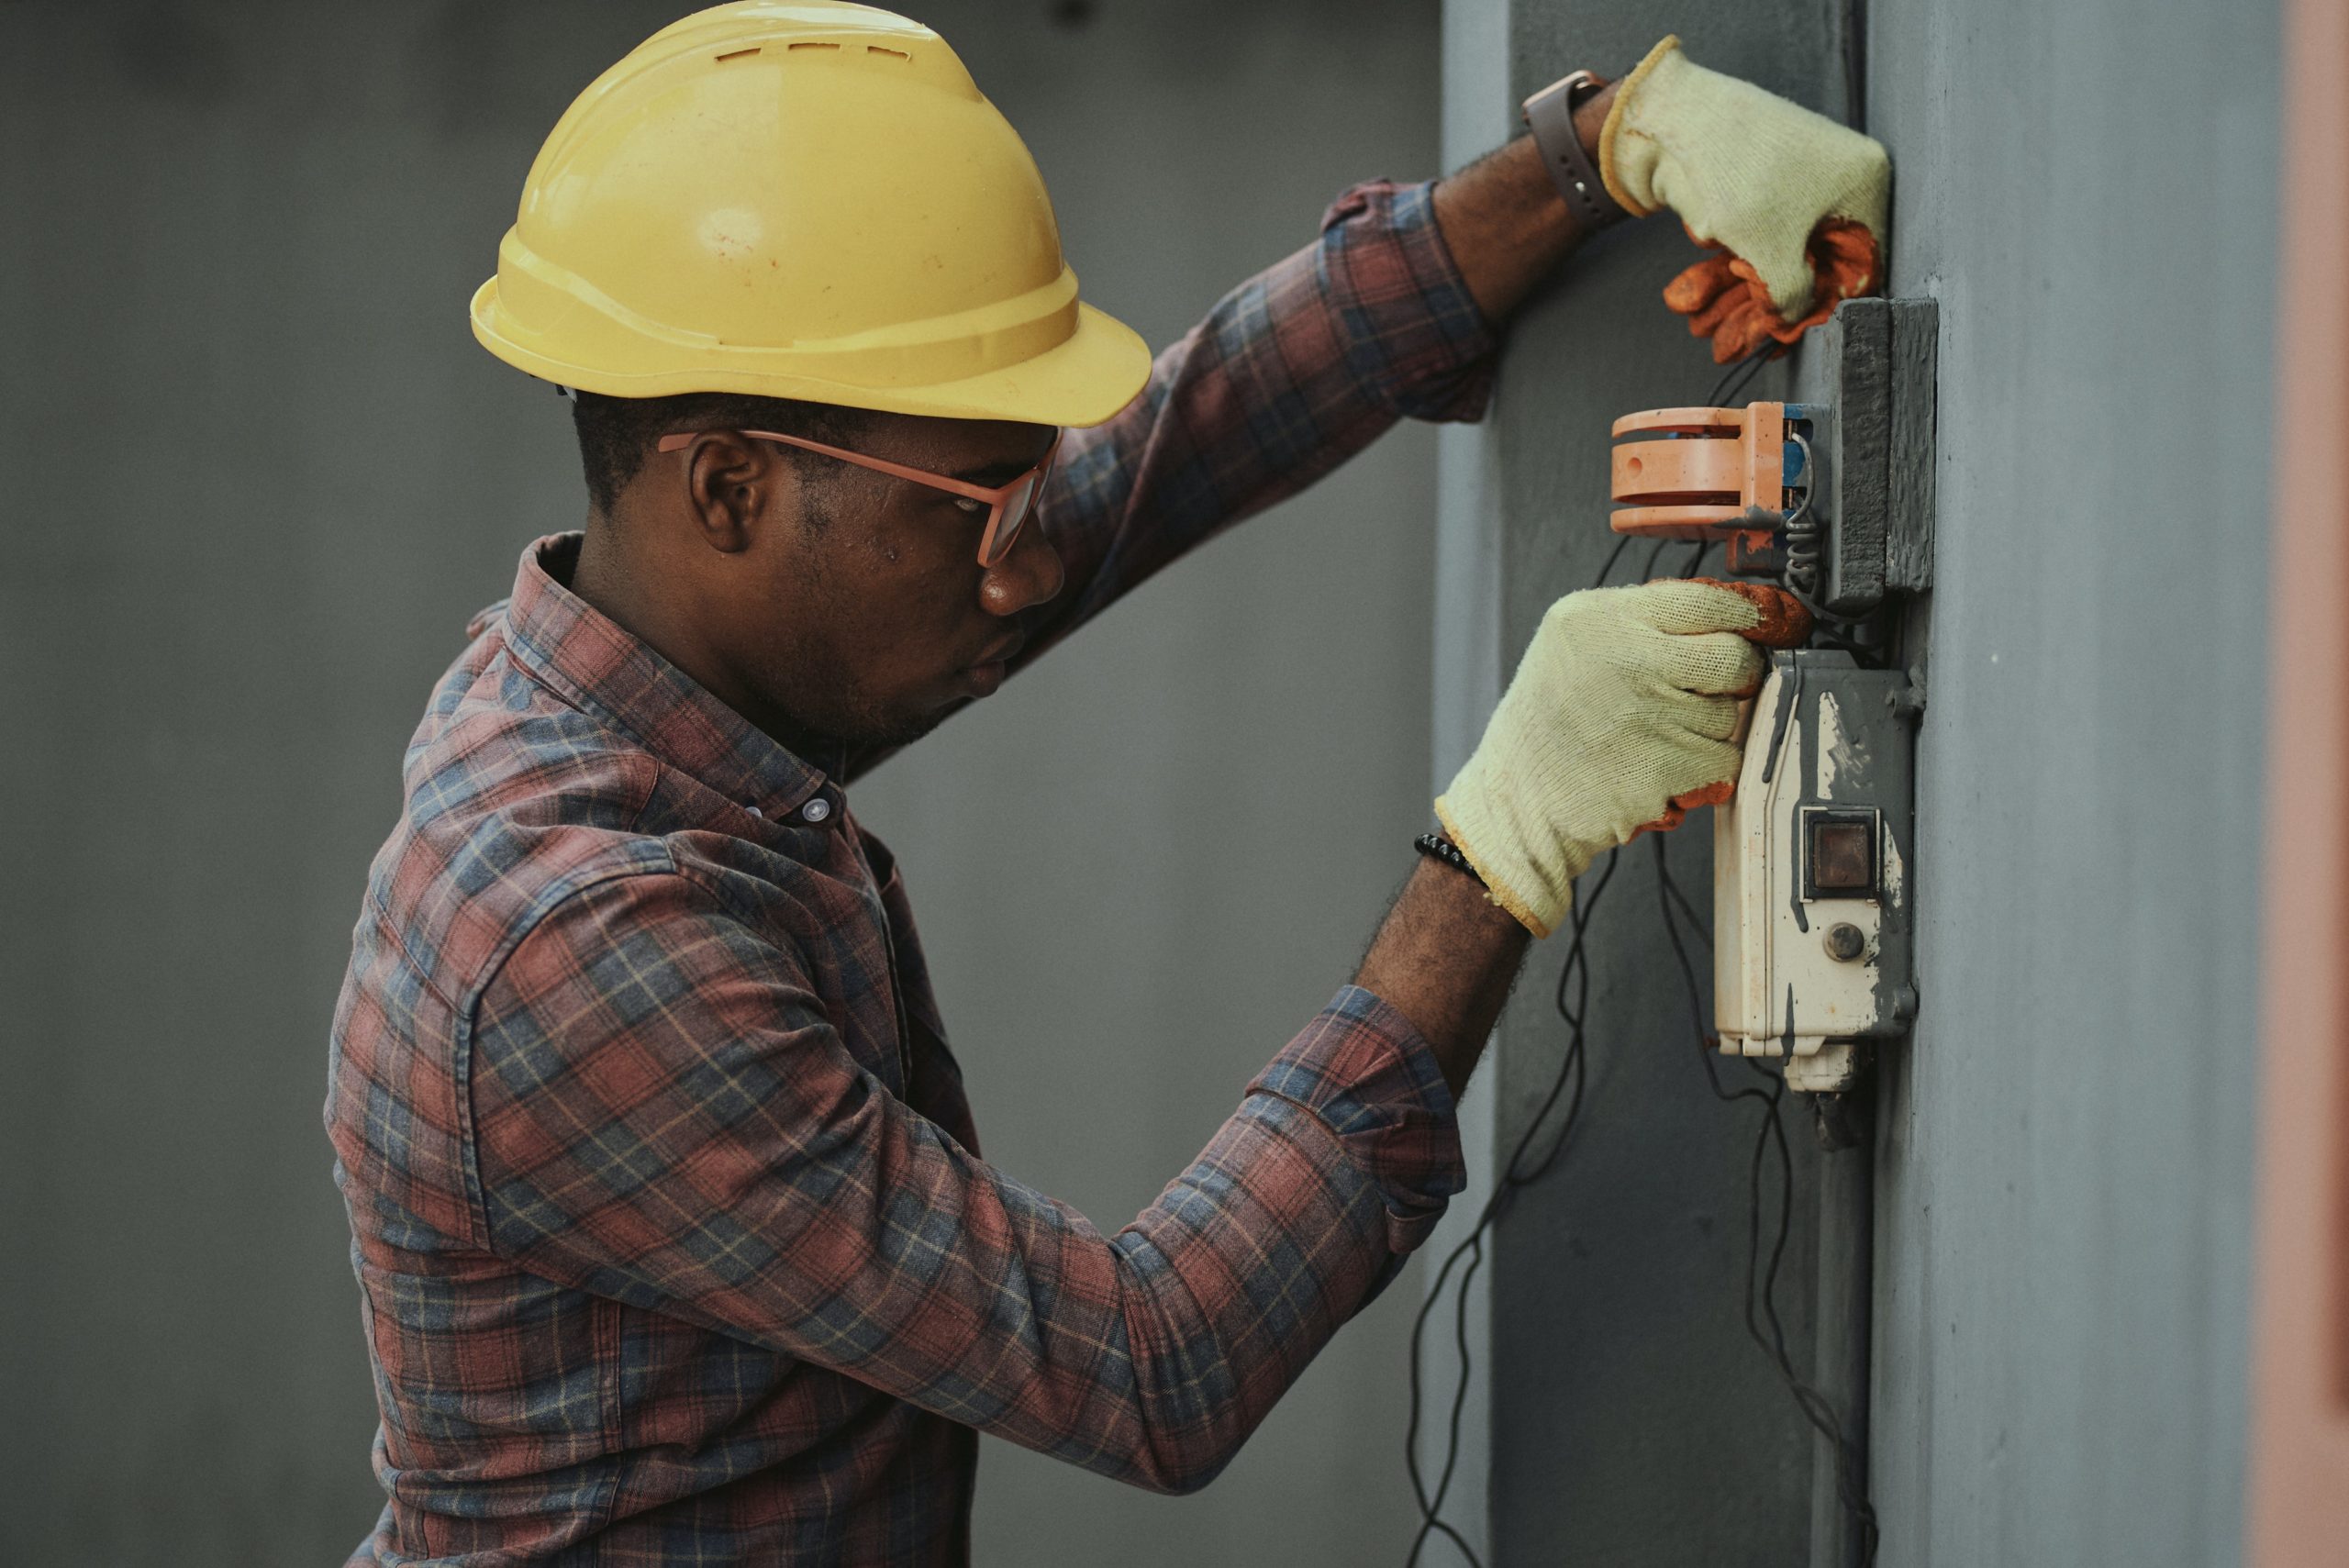 Read more about SFCC to offer NFPA 70E Electrical Safety workforce training